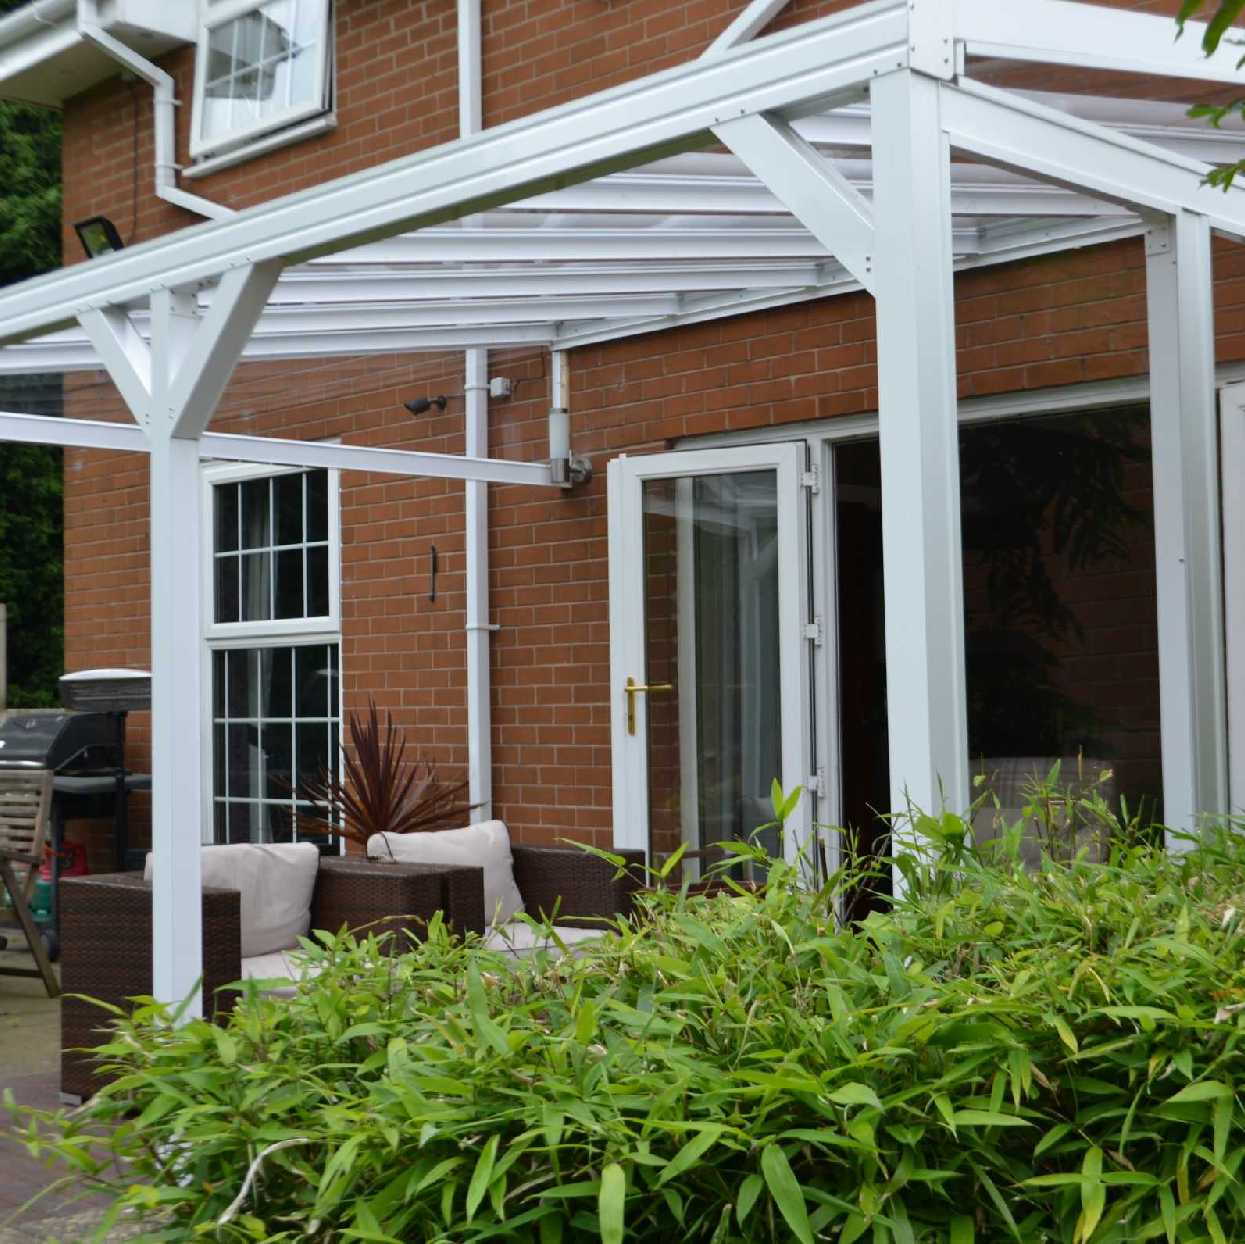 Omega Smart Lean-To Canopy, White with 6mm Glass Clear Plate Polycarbonate Glazing - 6.3m (W) x 4.0m (P), (4) Supporting Posts from Omega Build